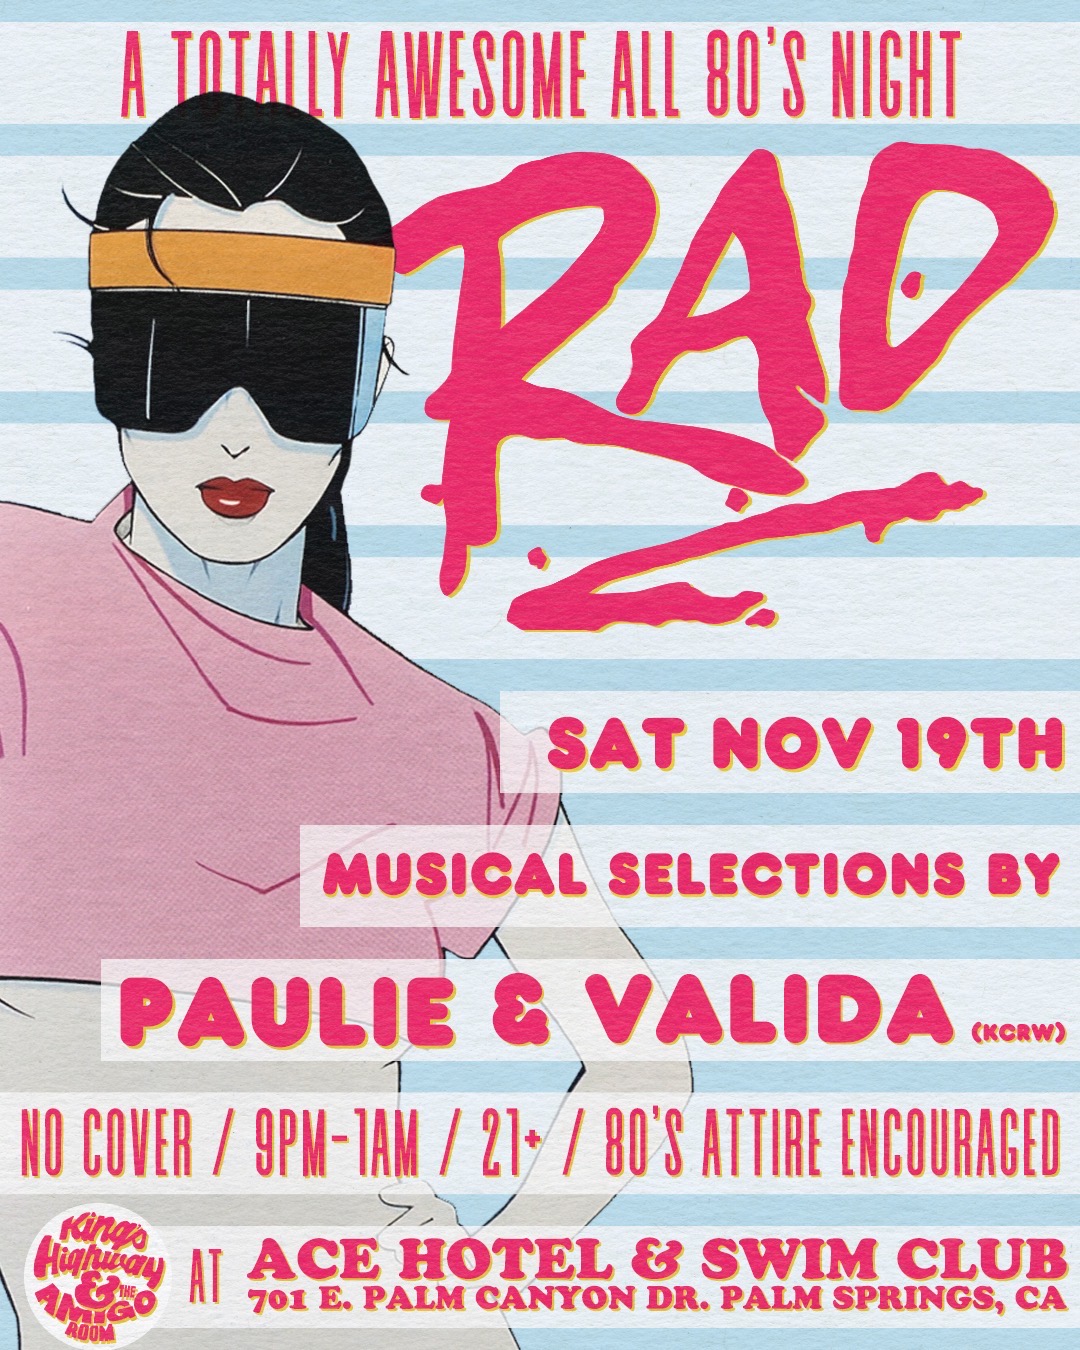 80's night poster dated for Saturday November 19th Musical selection by Paulie and Valida 9pm to 1pm , 21 years and up. 80's attire encouraged . At ace hotel & swim club